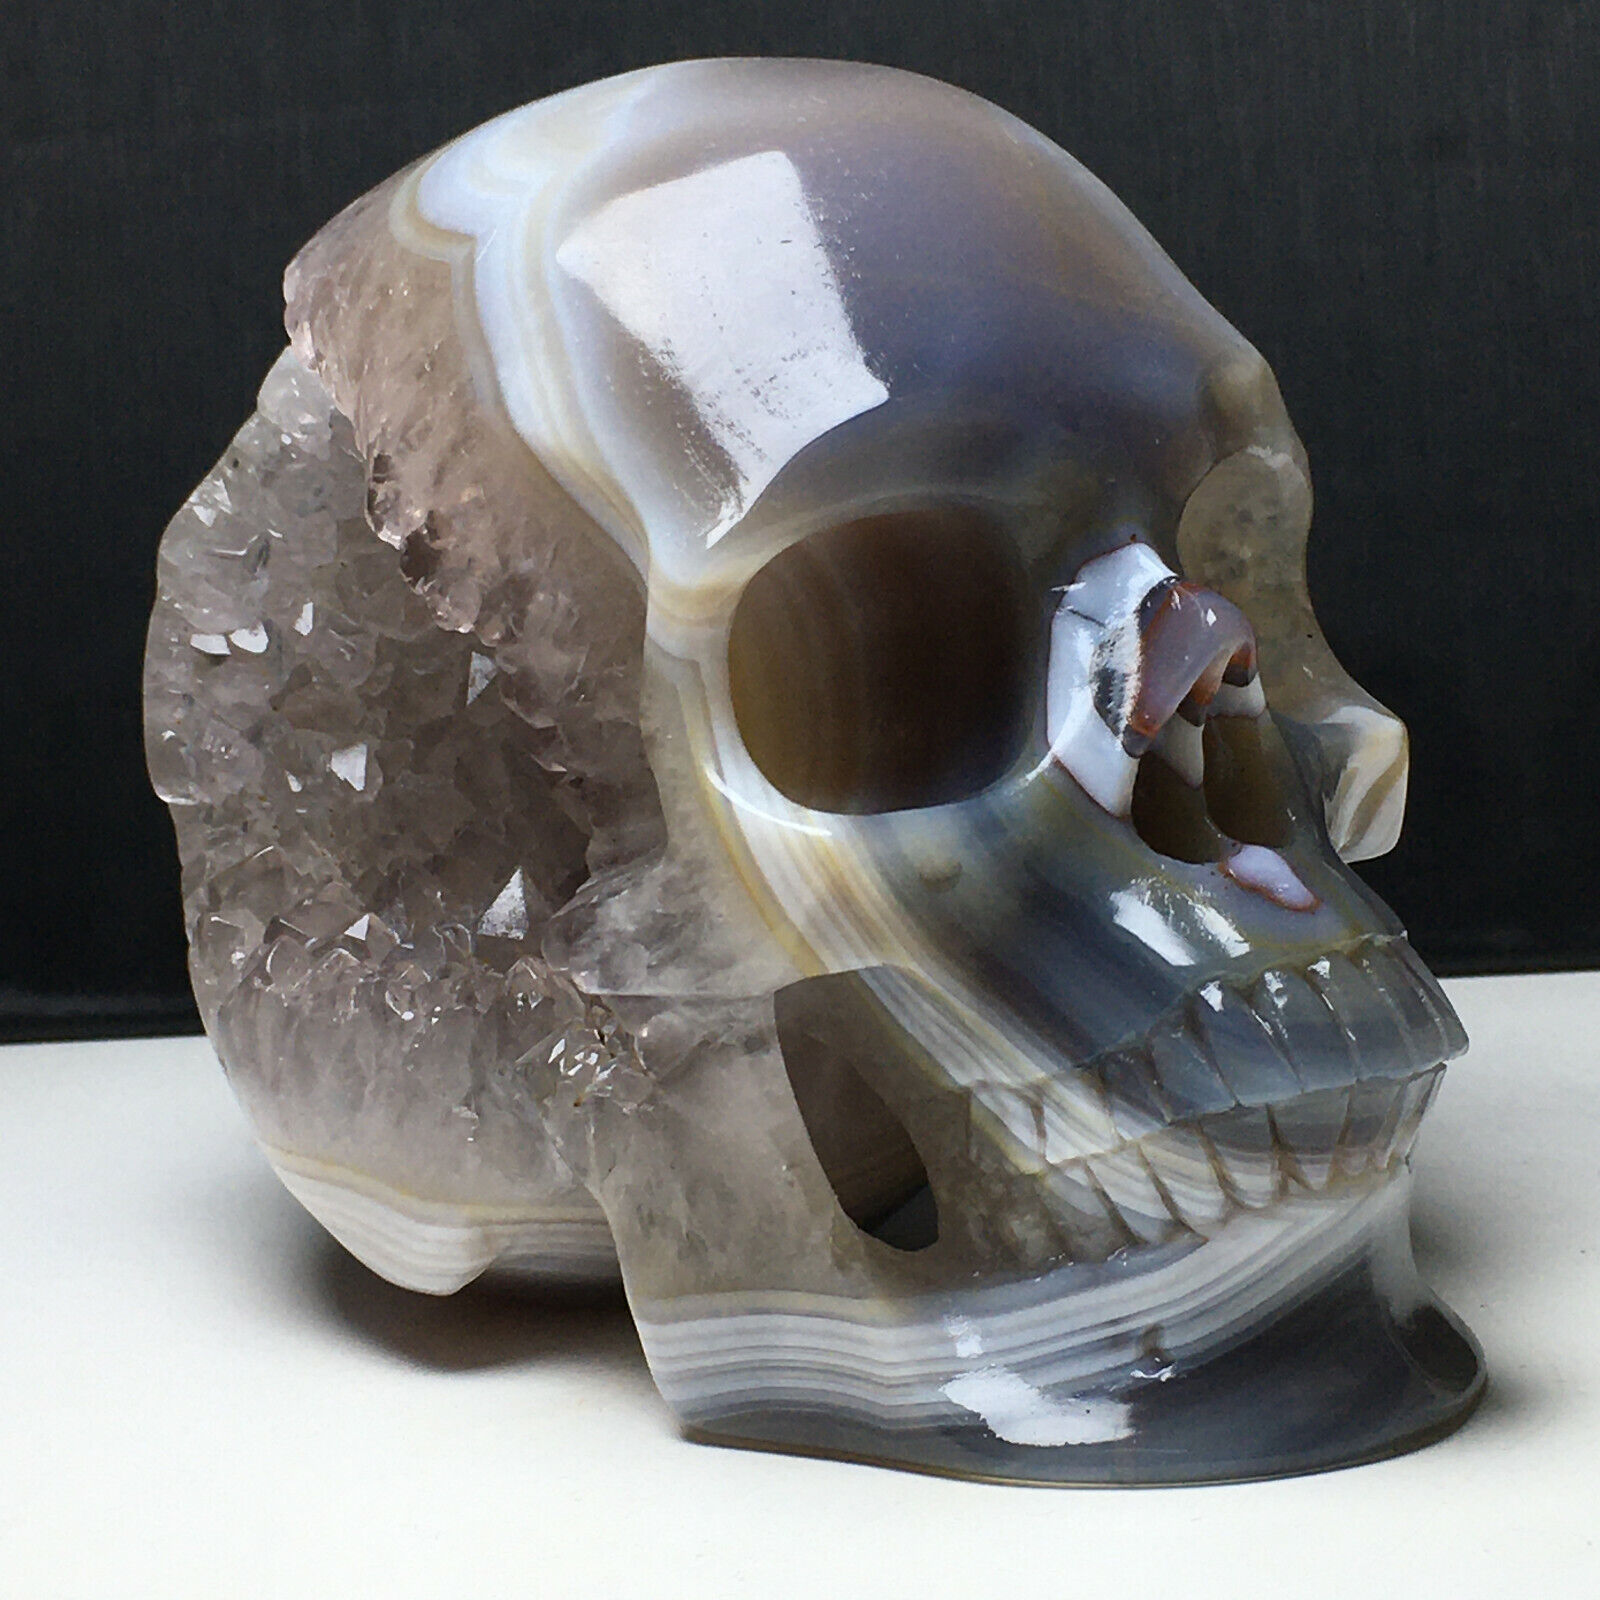 1025gNatural Crystal Agate Geode,Specimen Stone,Hand-Carved. The Exquisite Skull